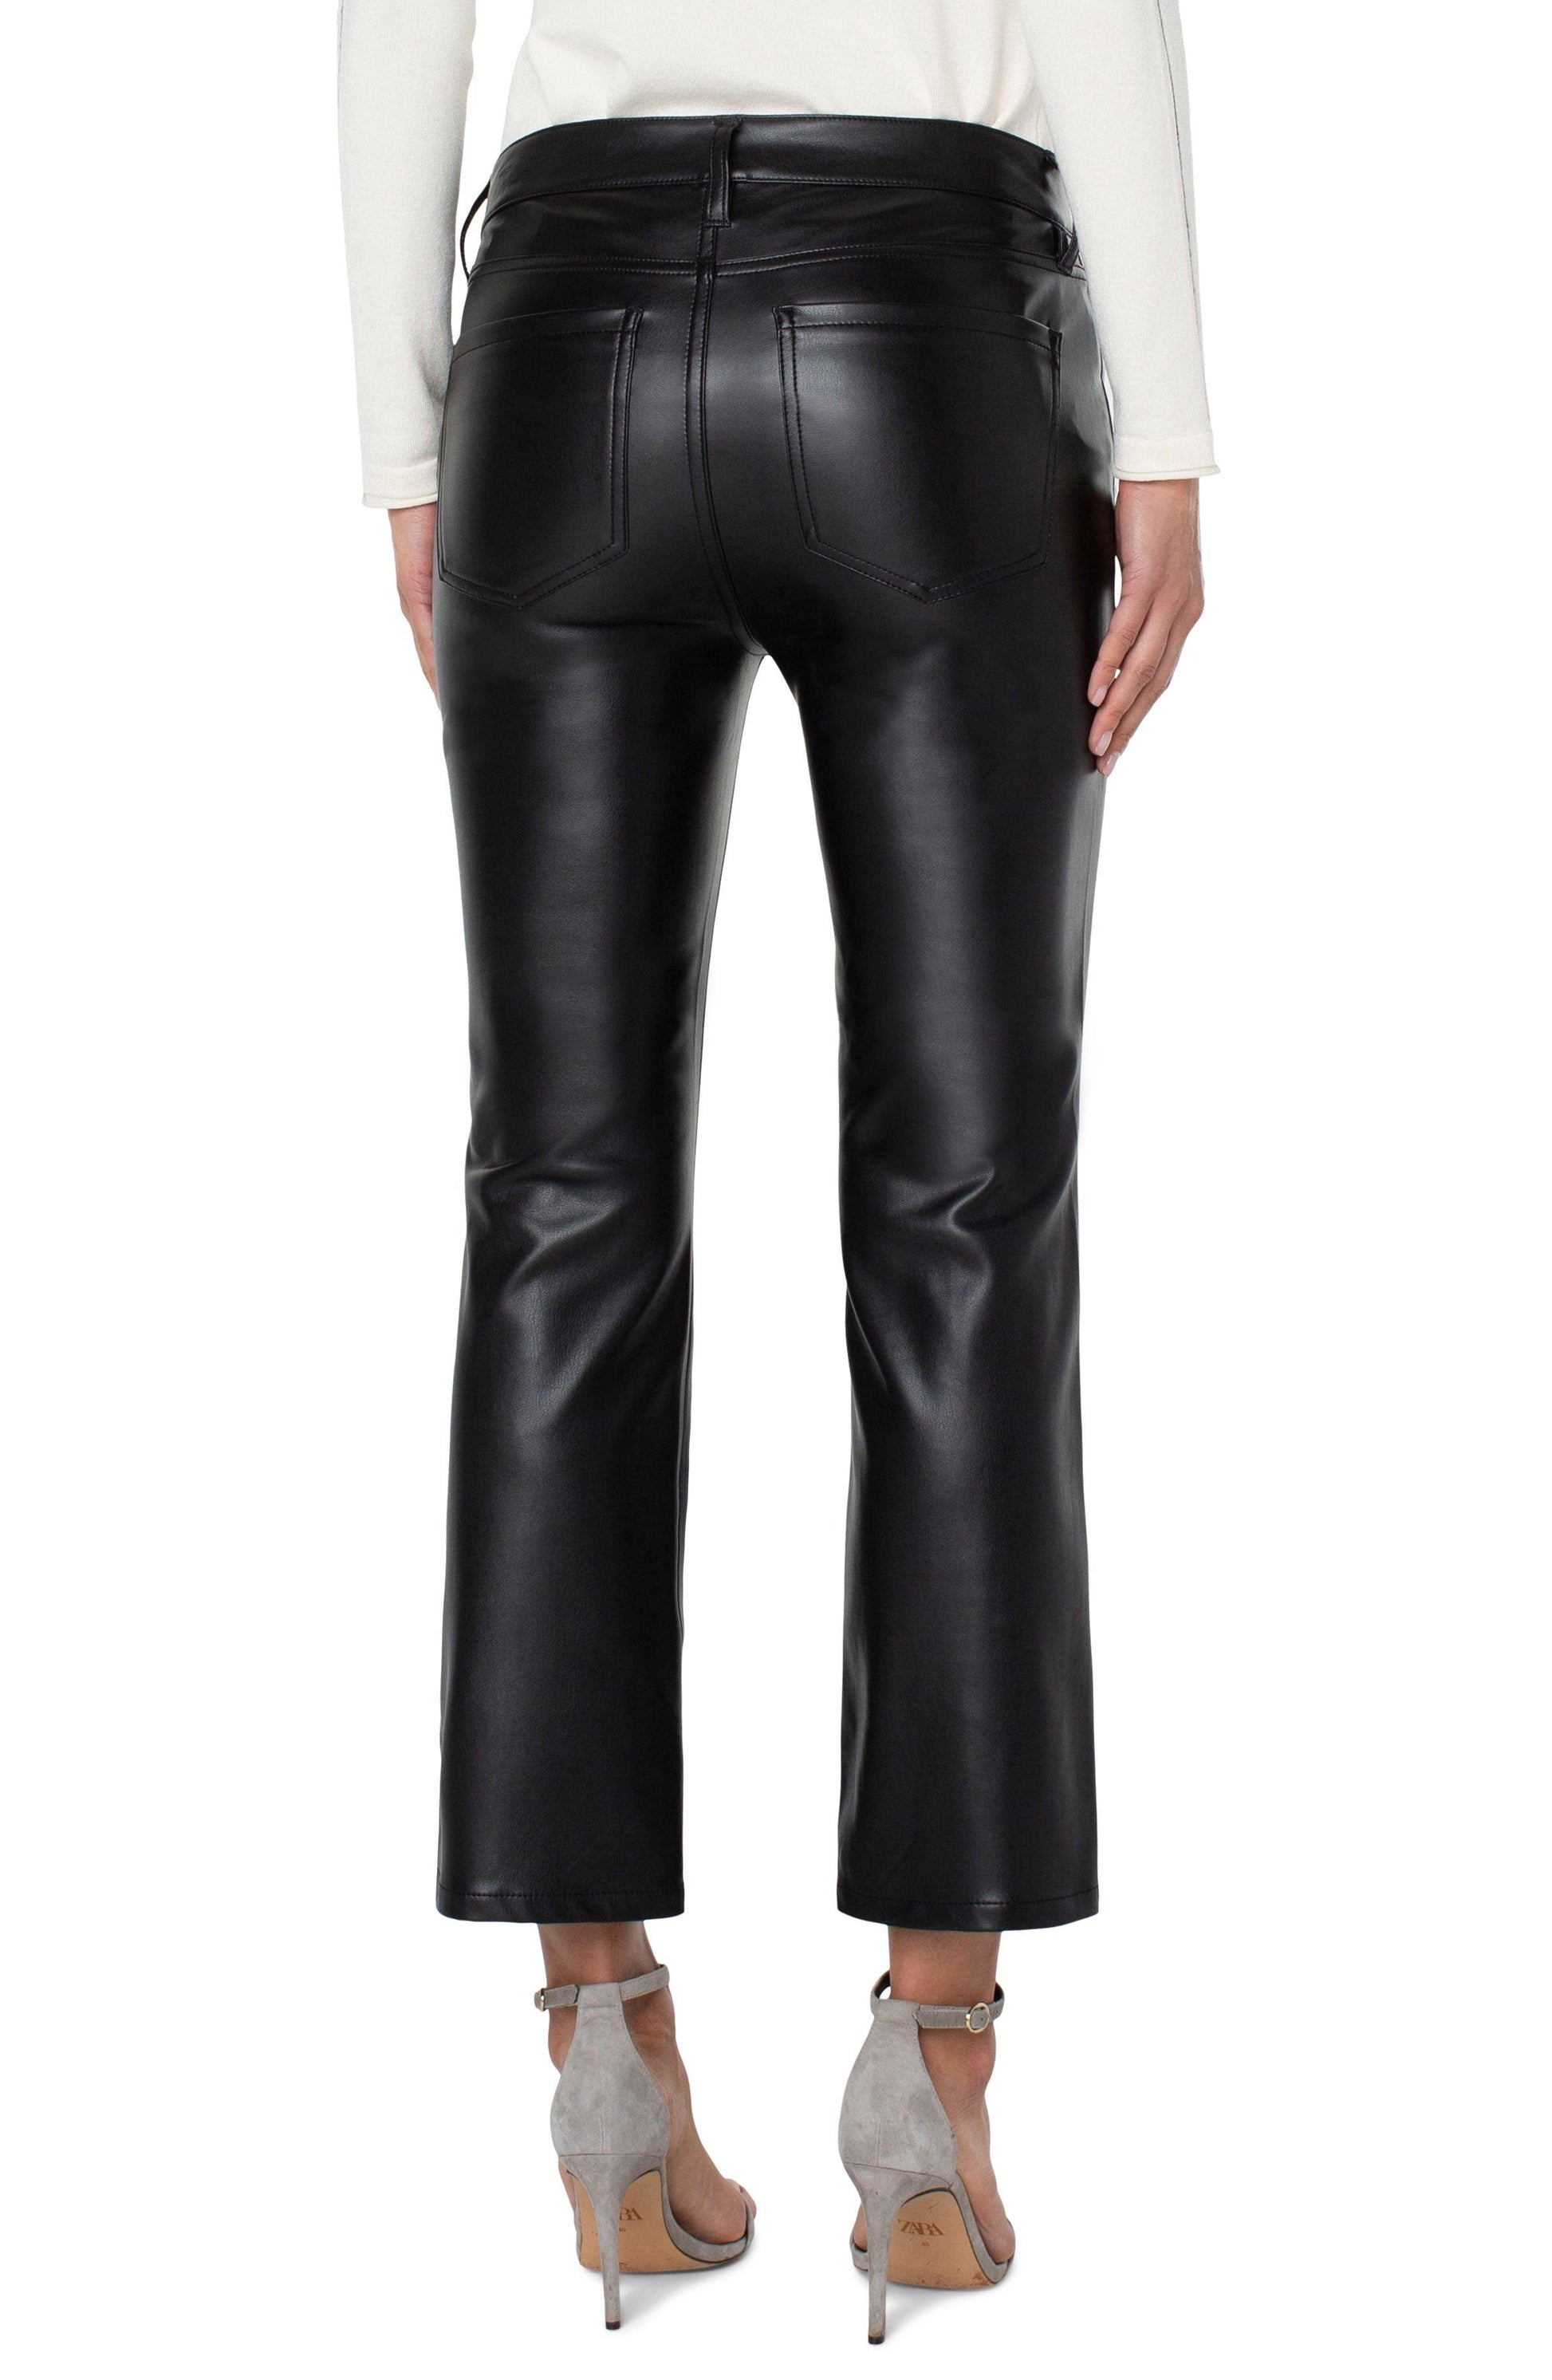 Black Liverpool Hannah Ankle Flare Faux Leather Pants - Strawberry Moon Boutique